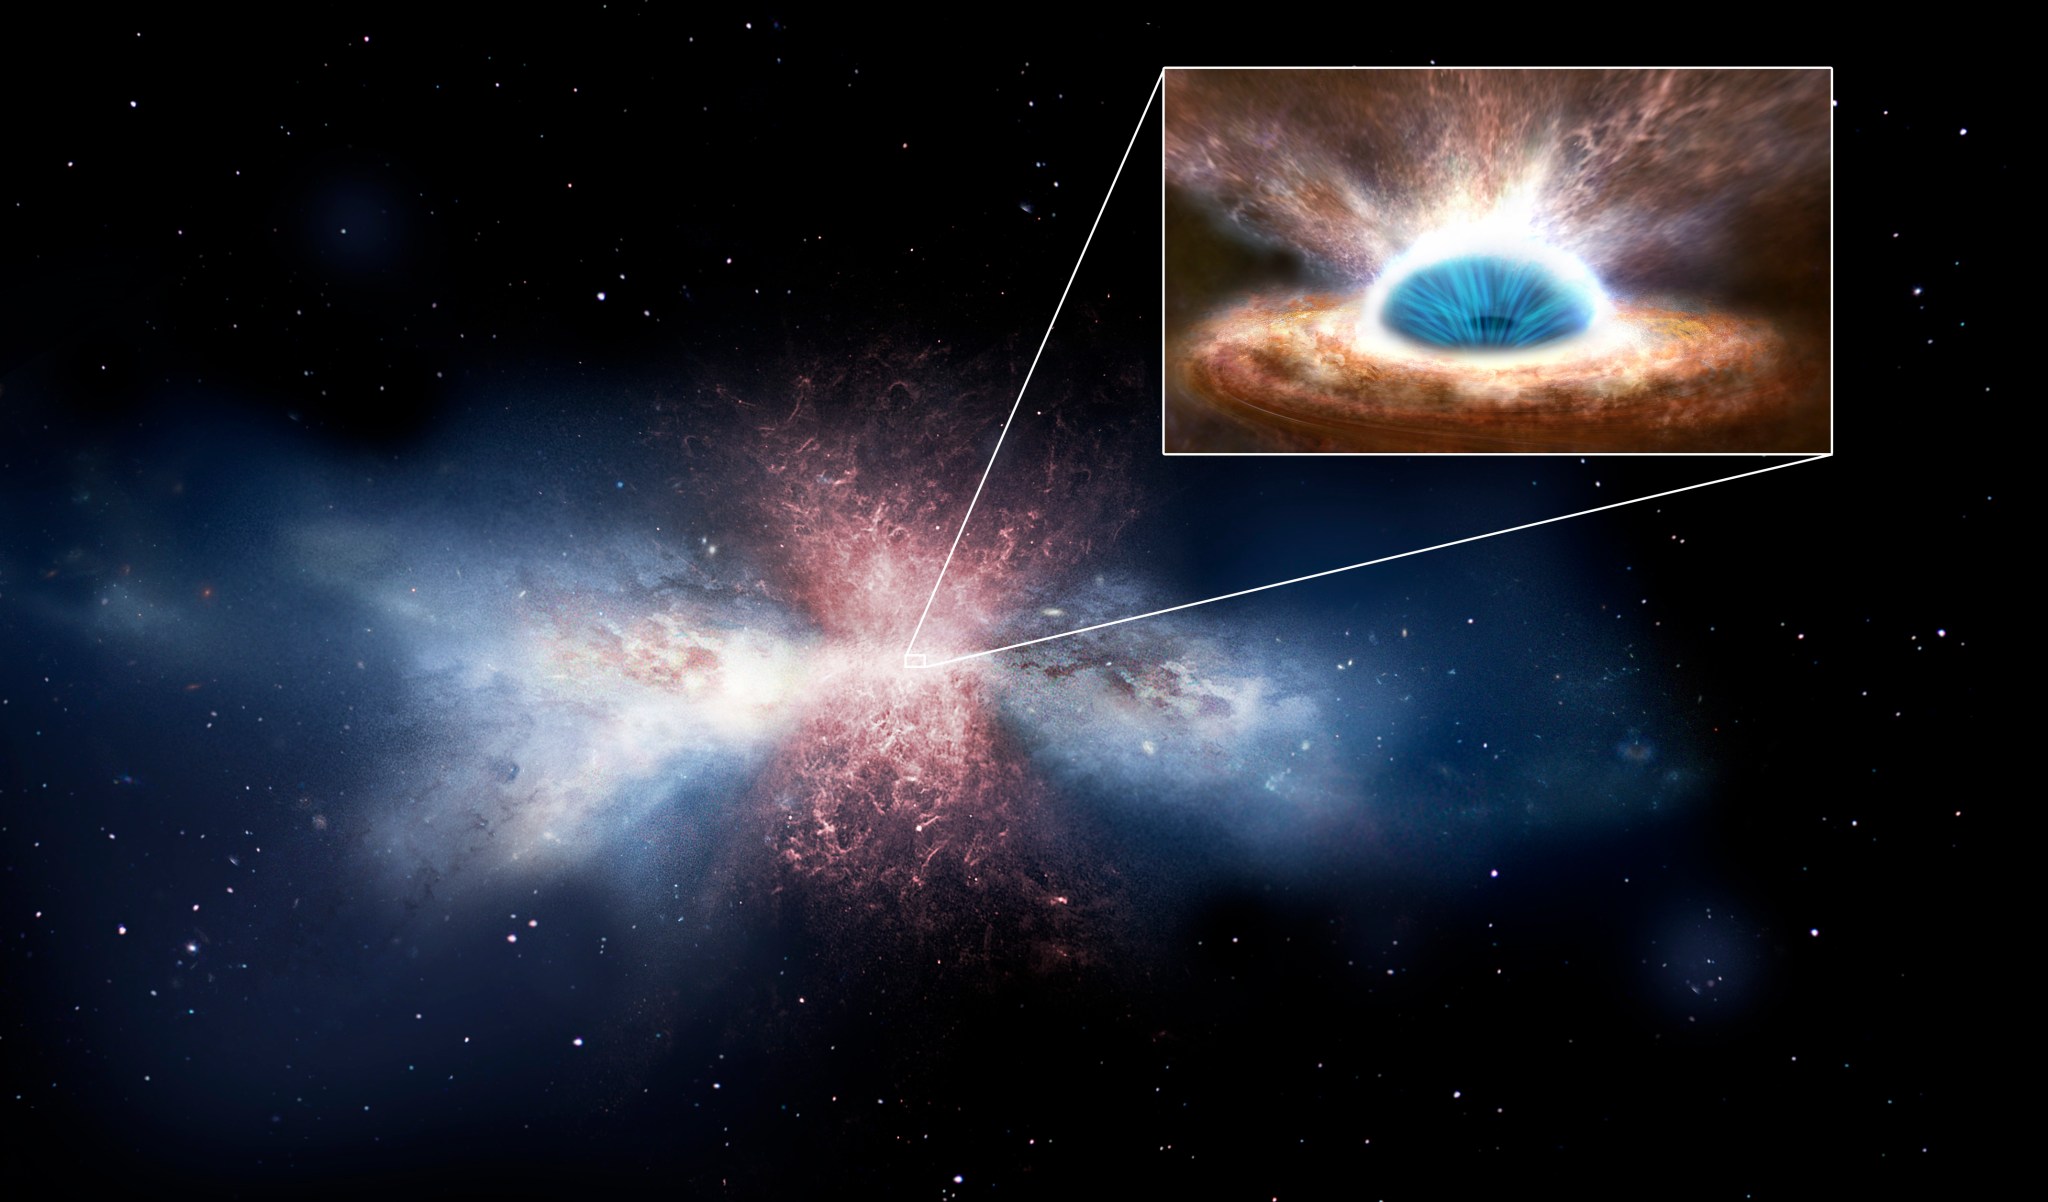 artist's rendering of a galaxy being cleared of interstellar gas